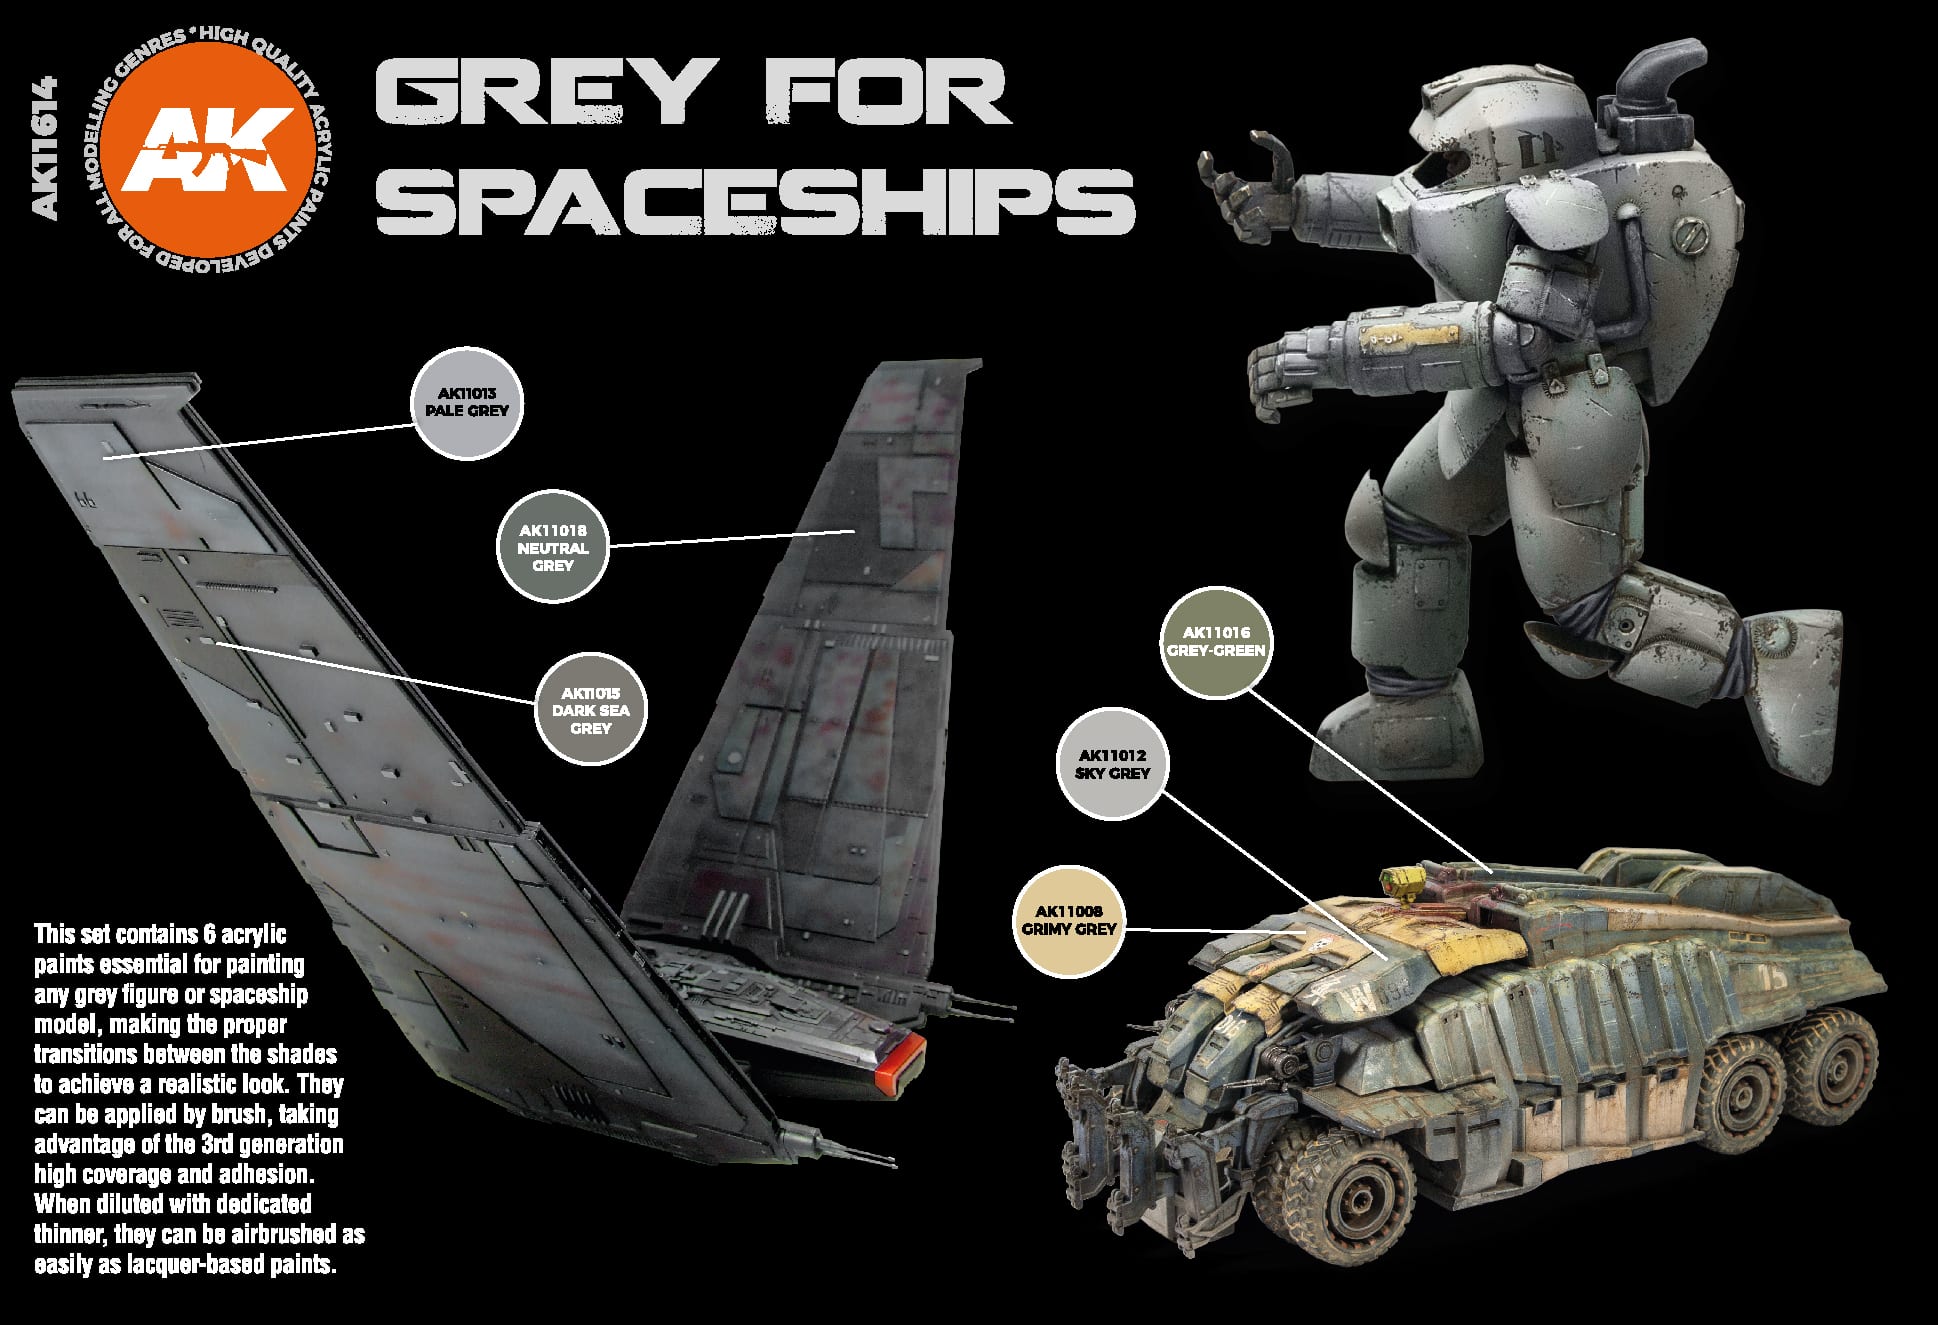 Buy GREY FOR SPACESHIPS online for 16,50€ | AK-Interactive